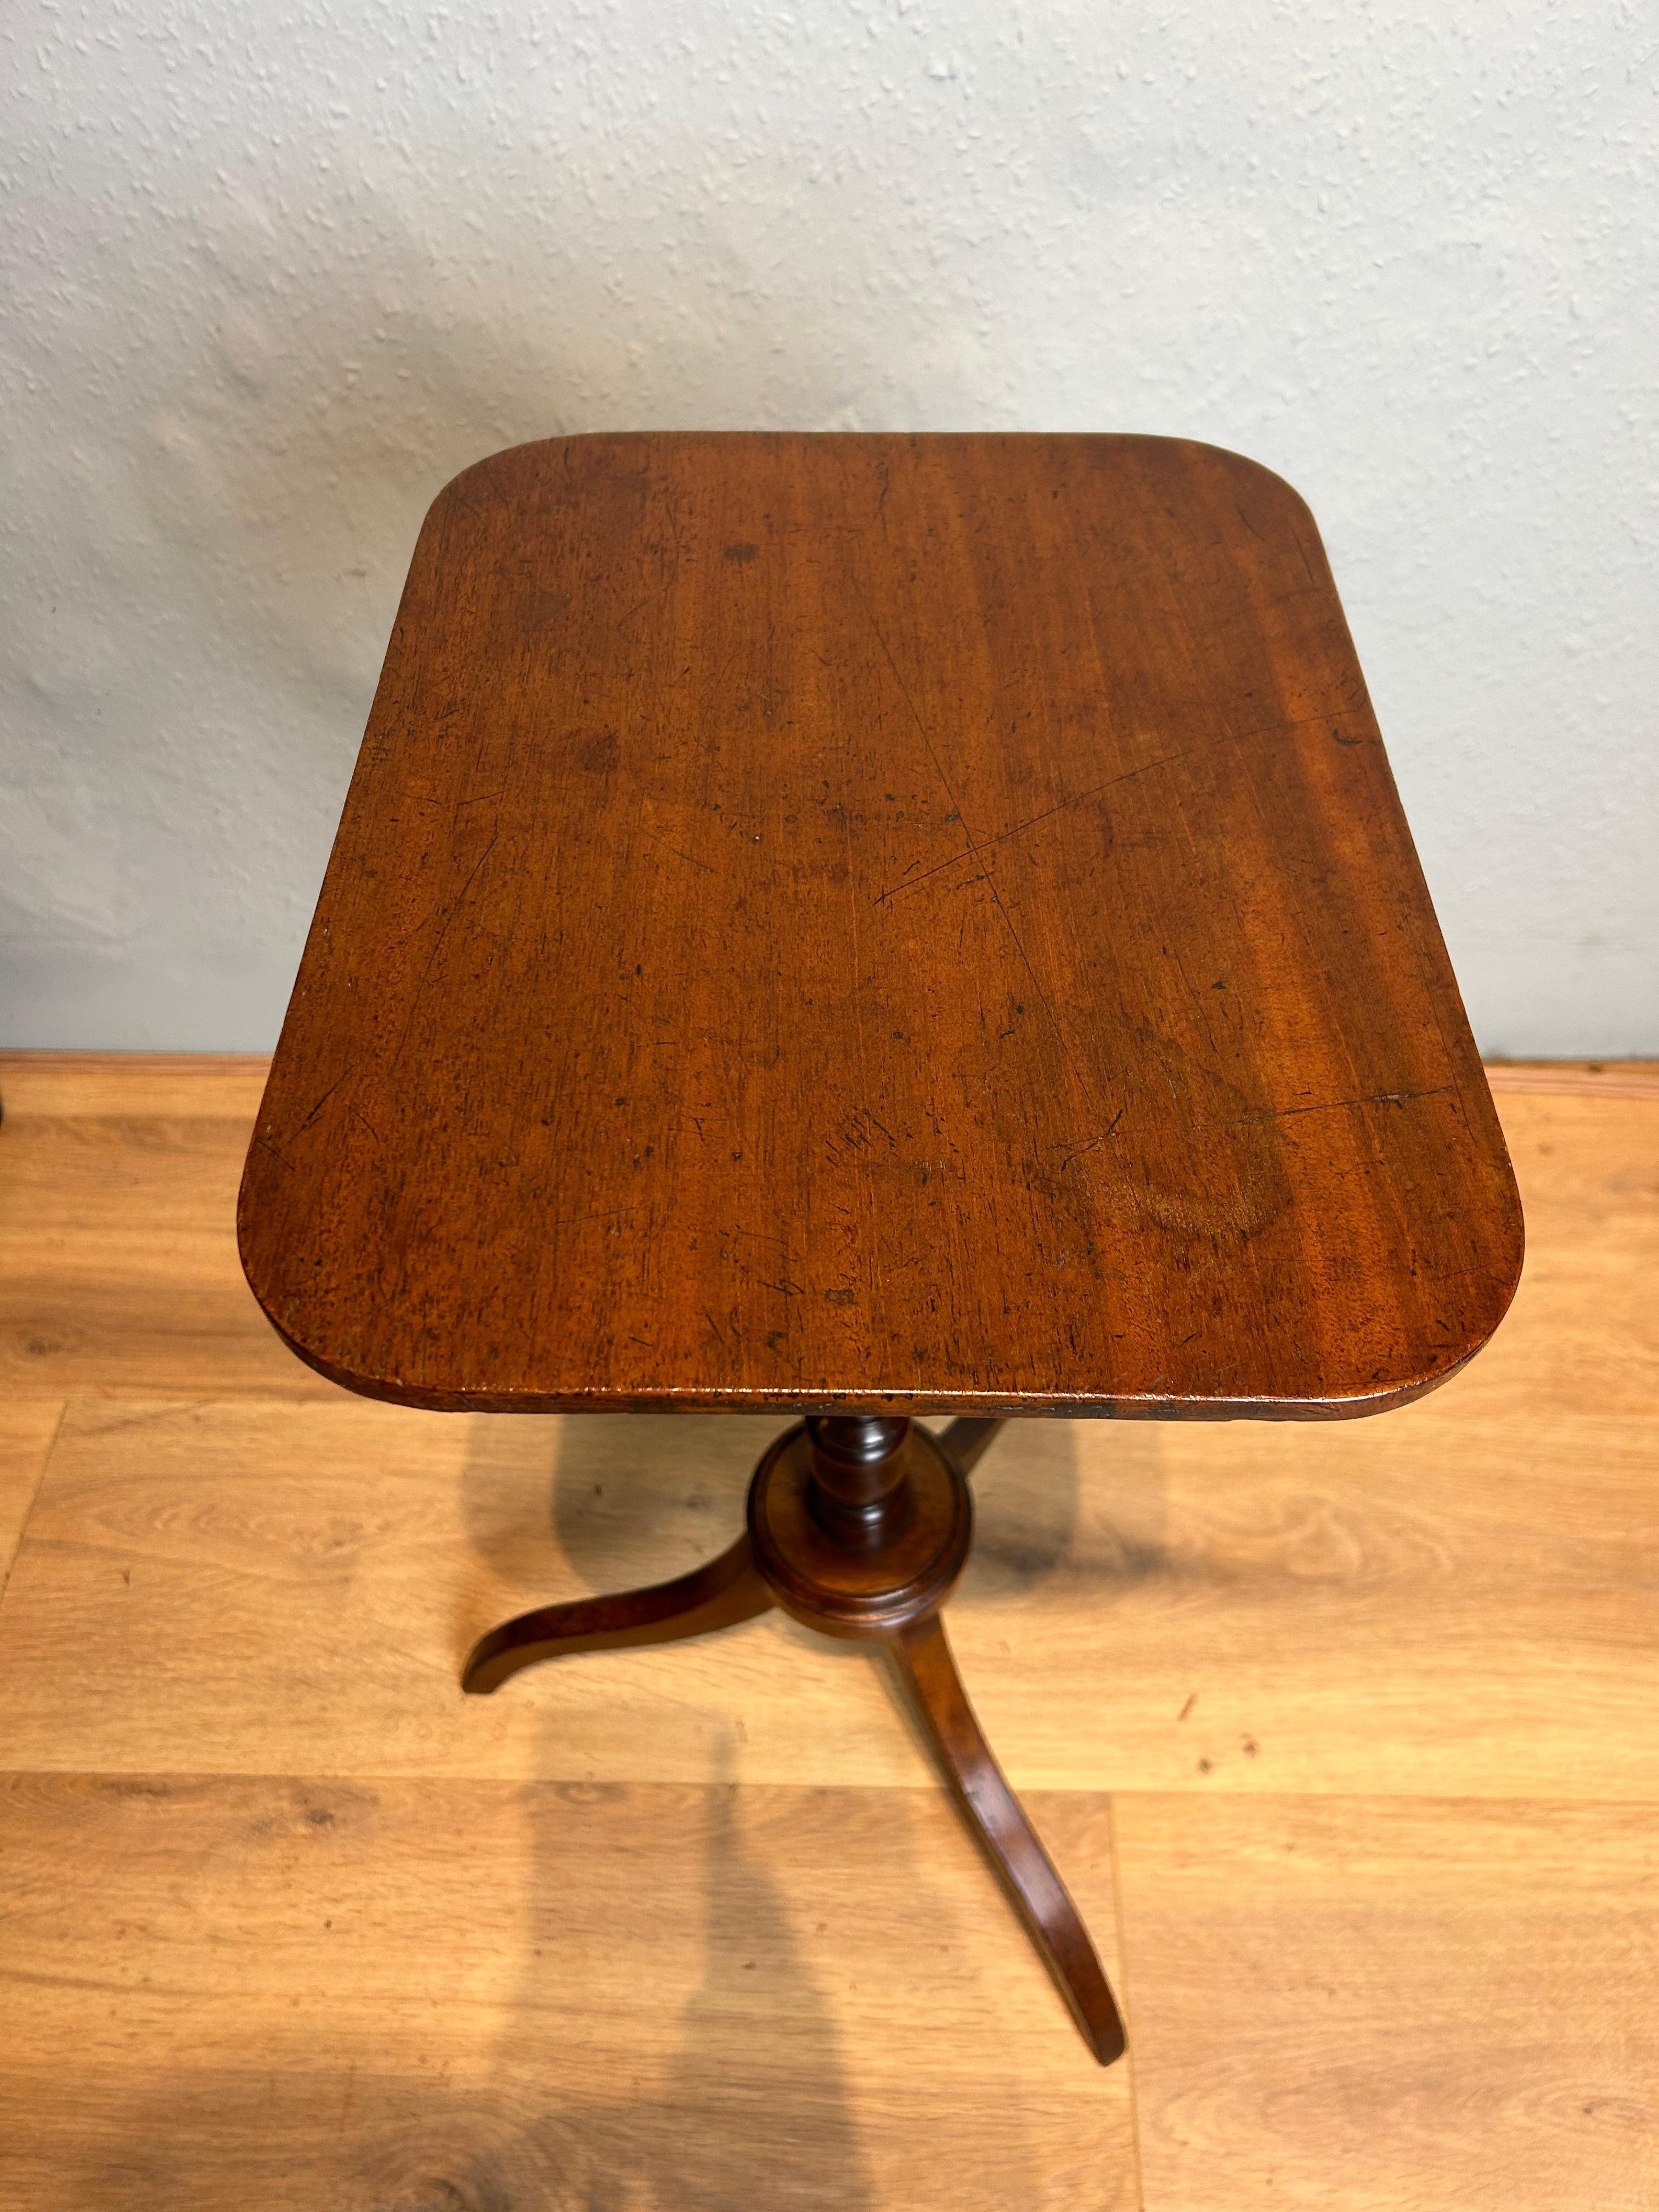 Antique English Regency mahogany lamp/ wine table with a fine thin top on a elegant turned column, resting on a turned moulded collar finishing on umbrella legs